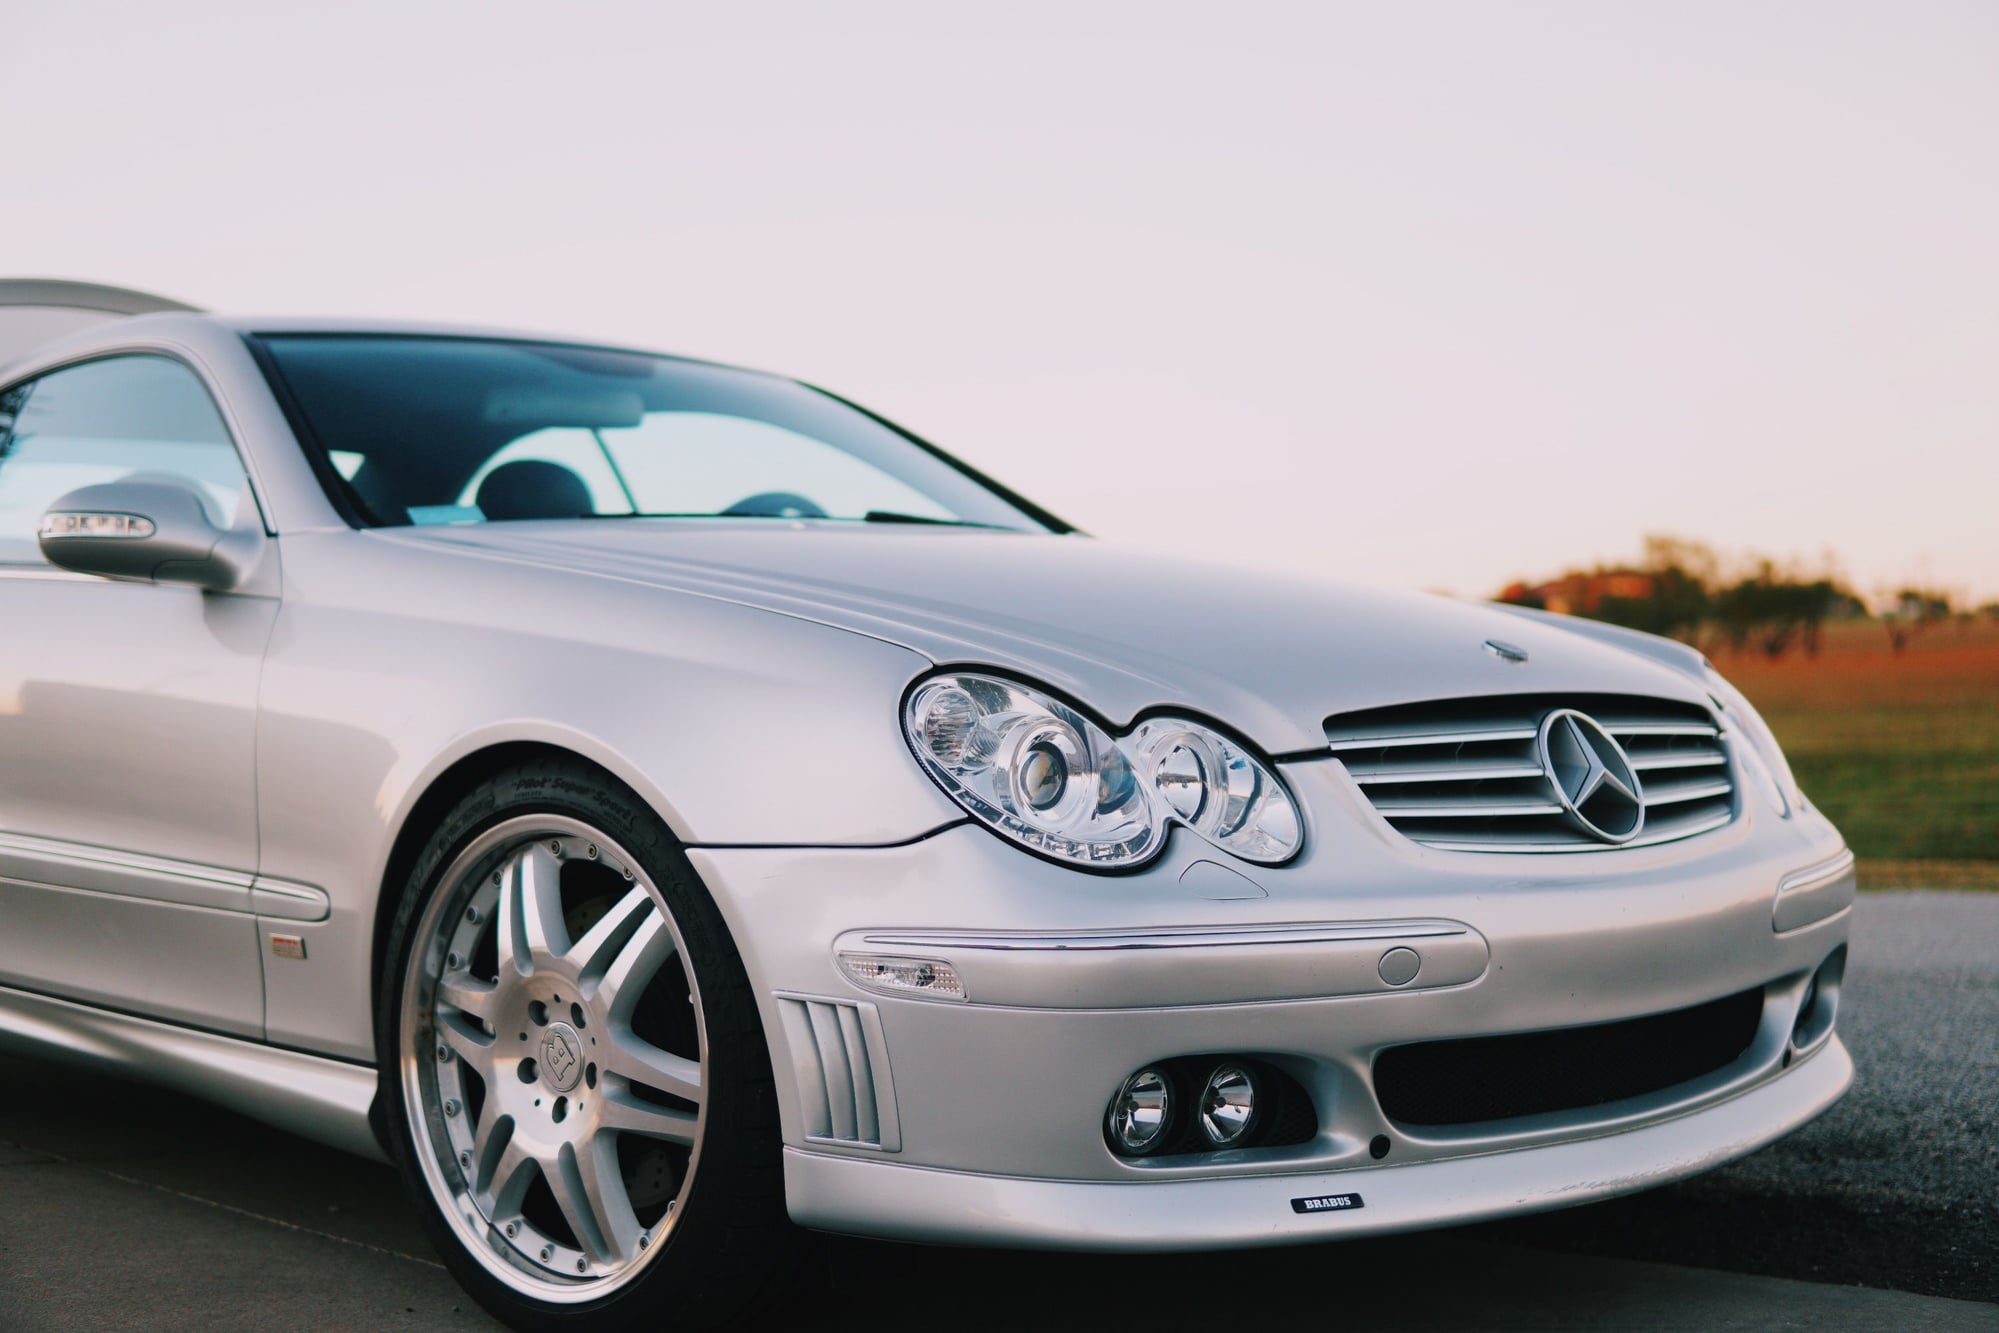 2003 Mercedes-Benz CLK55 AMG - Super RARE-1 of only 2-2003 Mercedes CLK BRABUS 6.1 - Used - VIN WDBTJ76H53F035701 - 64,000 Miles - 8 cyl - 2WD - Coupe - Silver - Fort Worth, TX 76179, United States